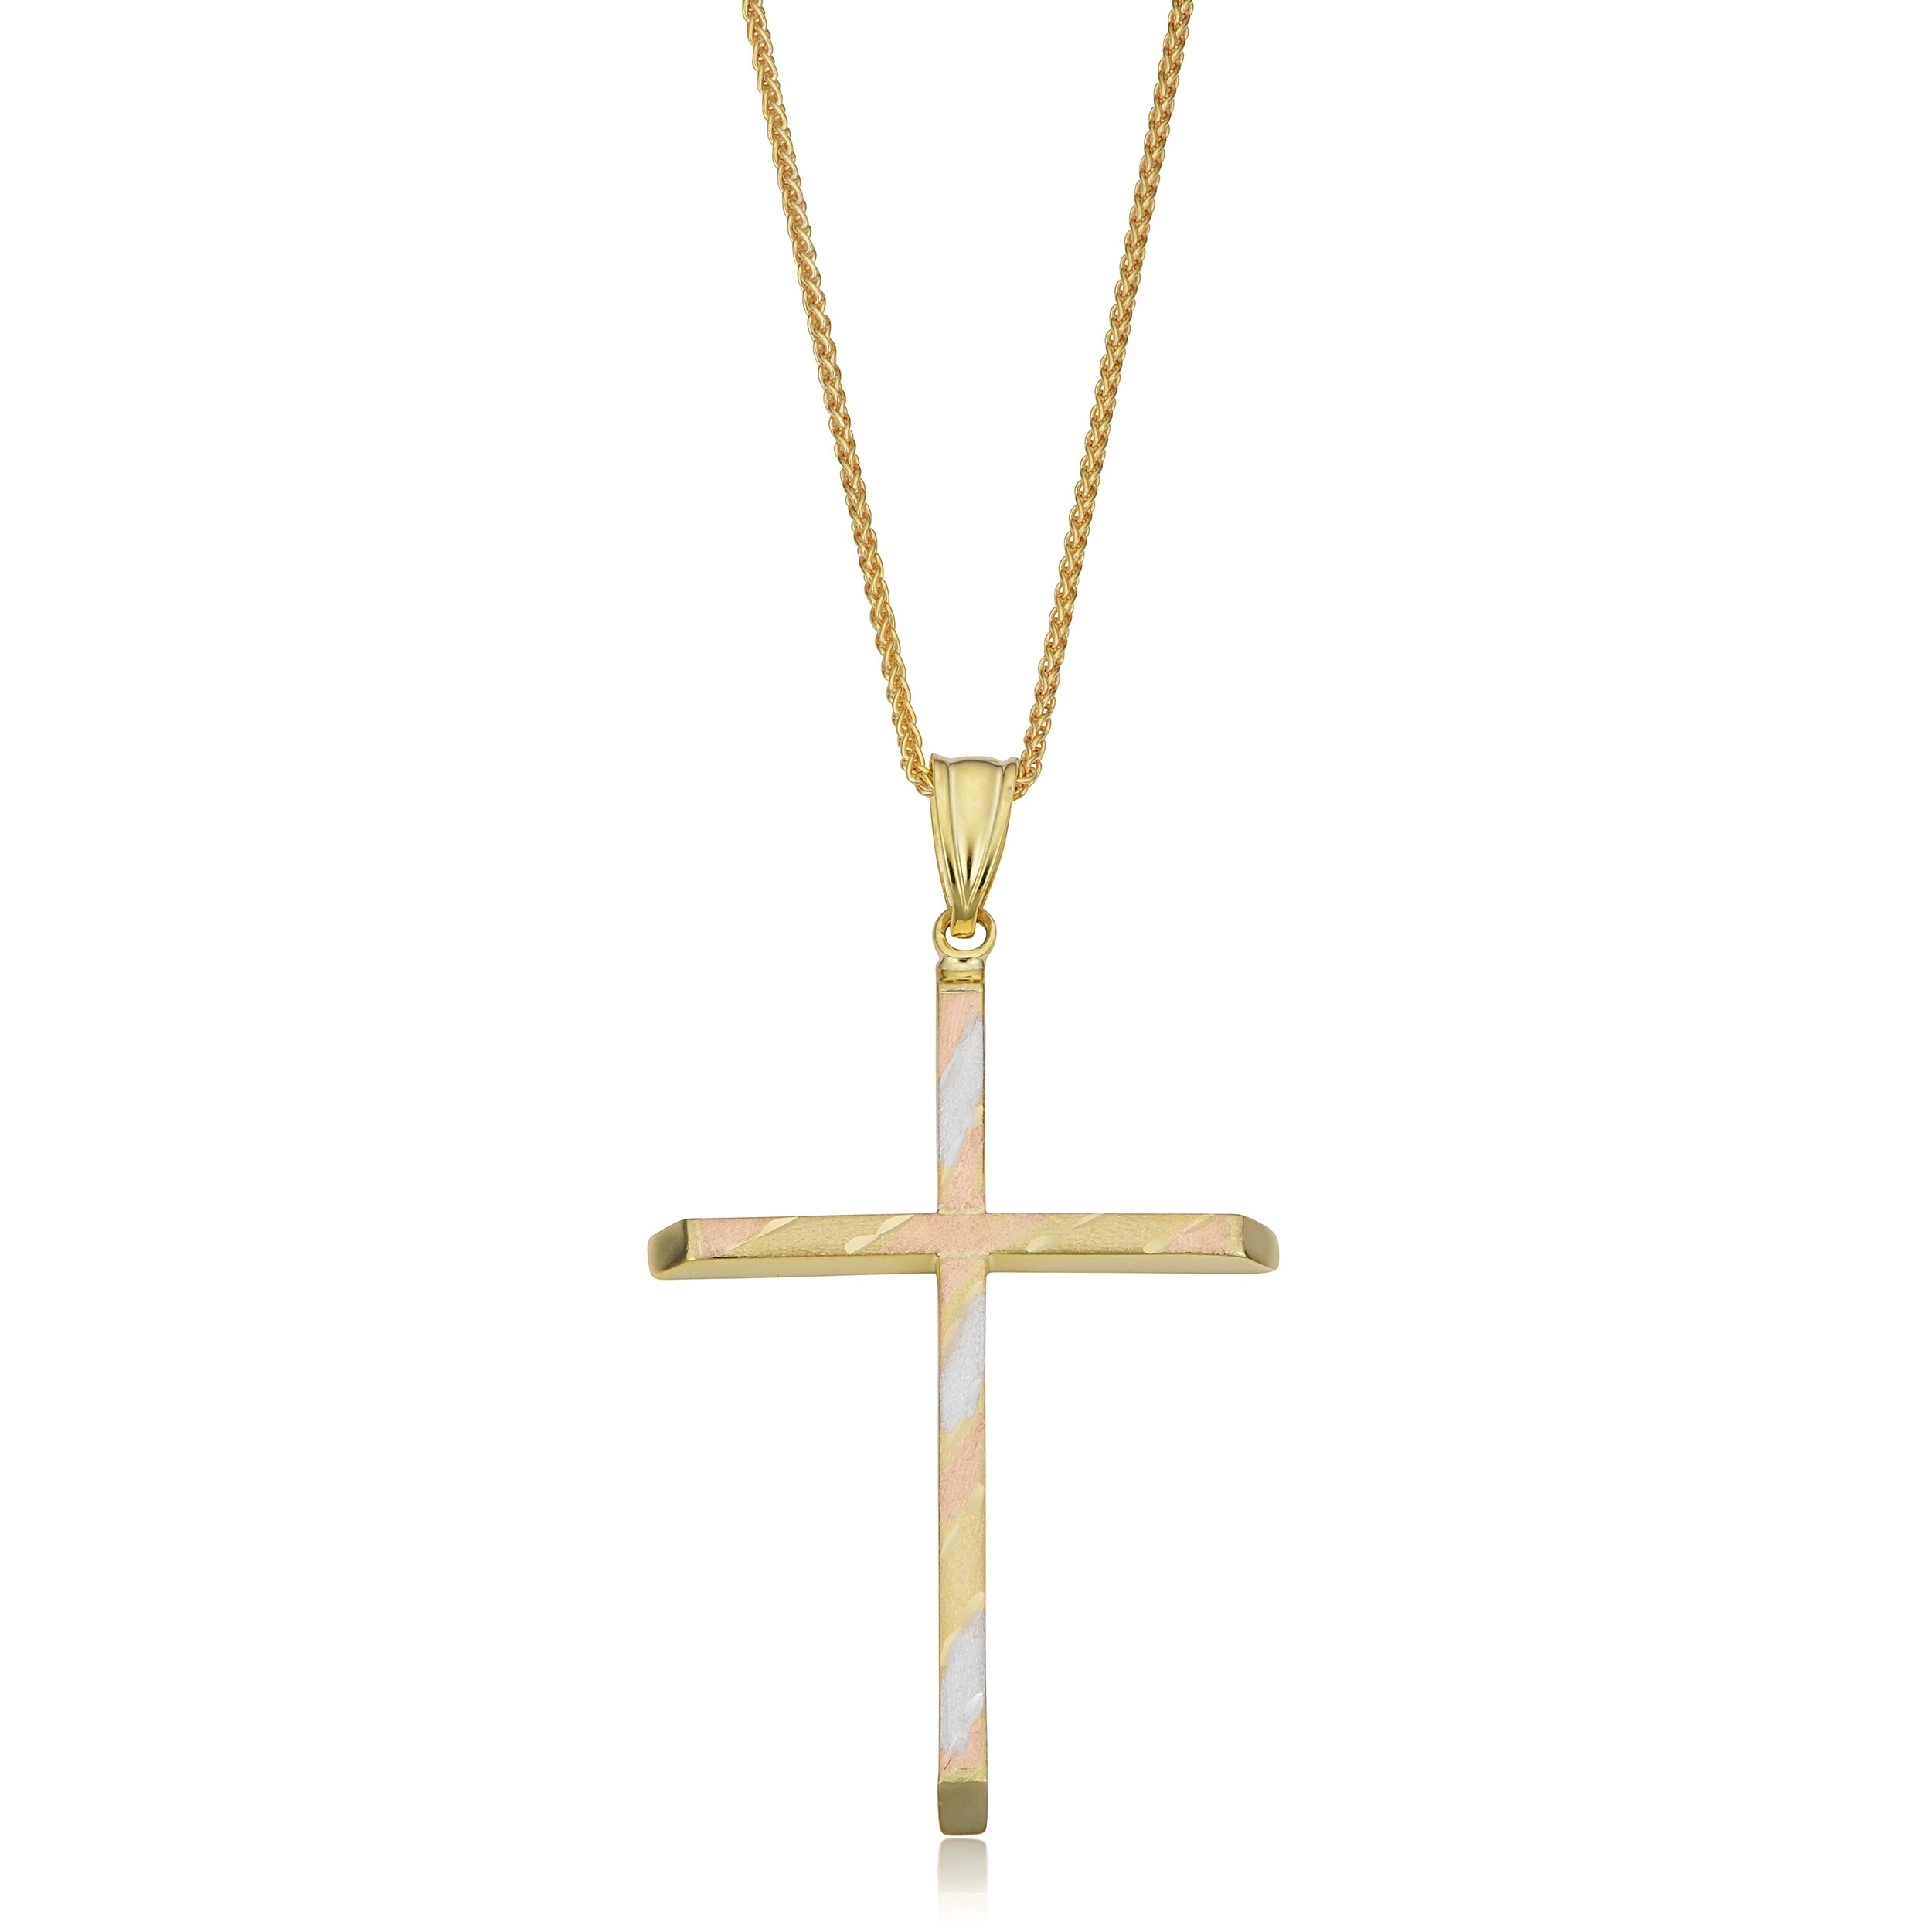 10k or 14k Tricolor Gold Cross Pendant with Complementary Gold Filled Wheat  Chain Necklace (18 inches)